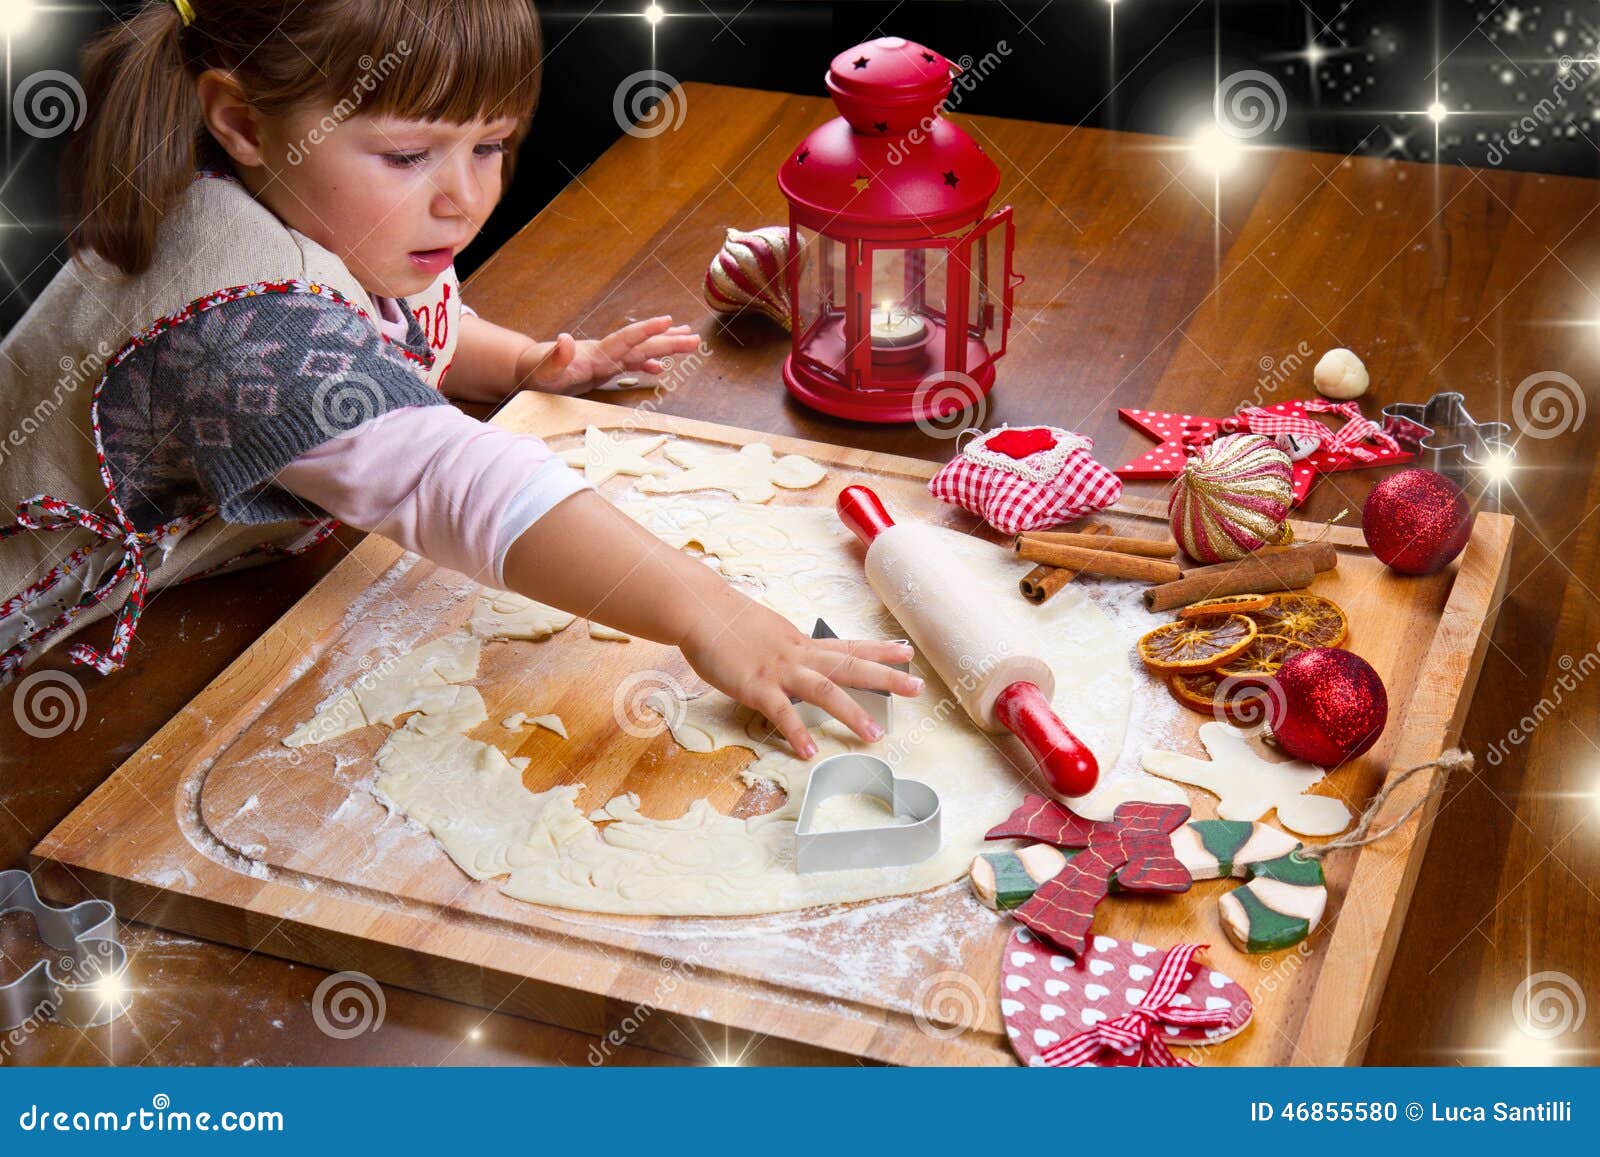 https://thumbs.dreamstime.com/z/little-girl-baking-christmas-cookies-cutting-pastry-cookie-cutter-46855580.jpg